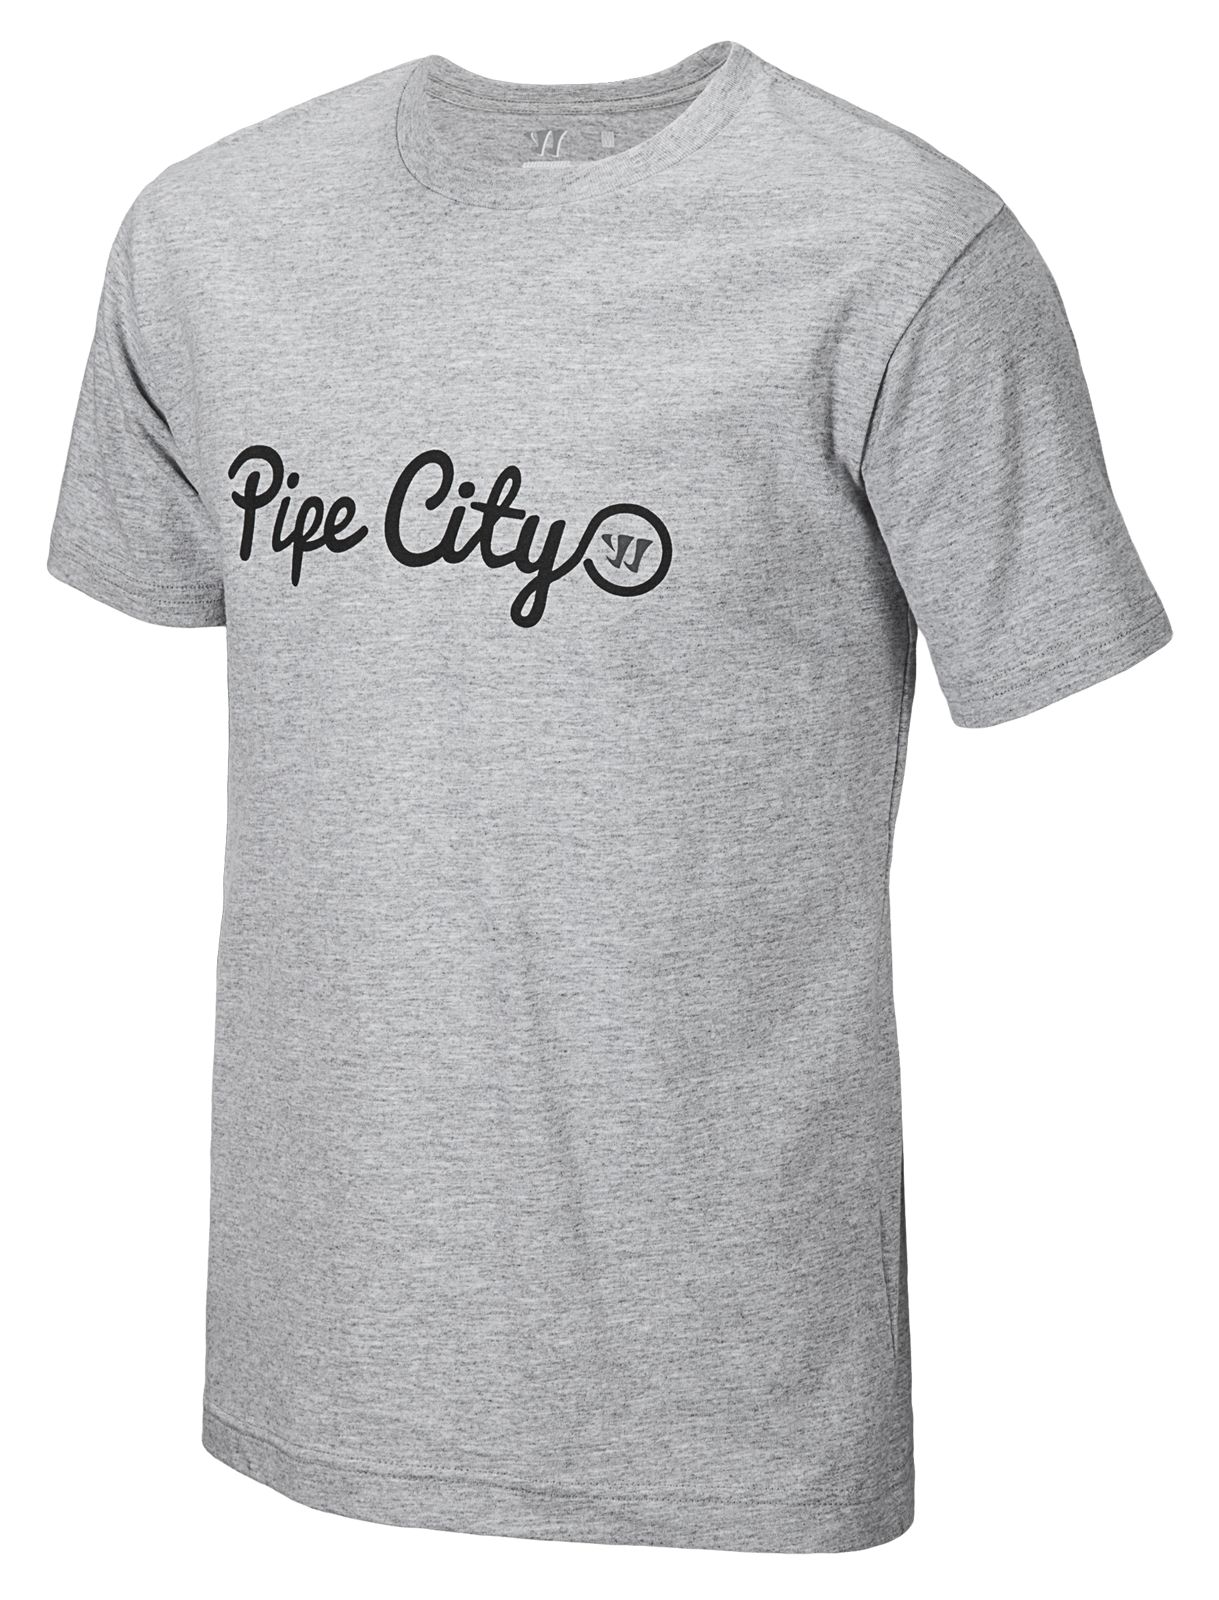 Youth Pipe City Tee, Athletic Grey image number 1